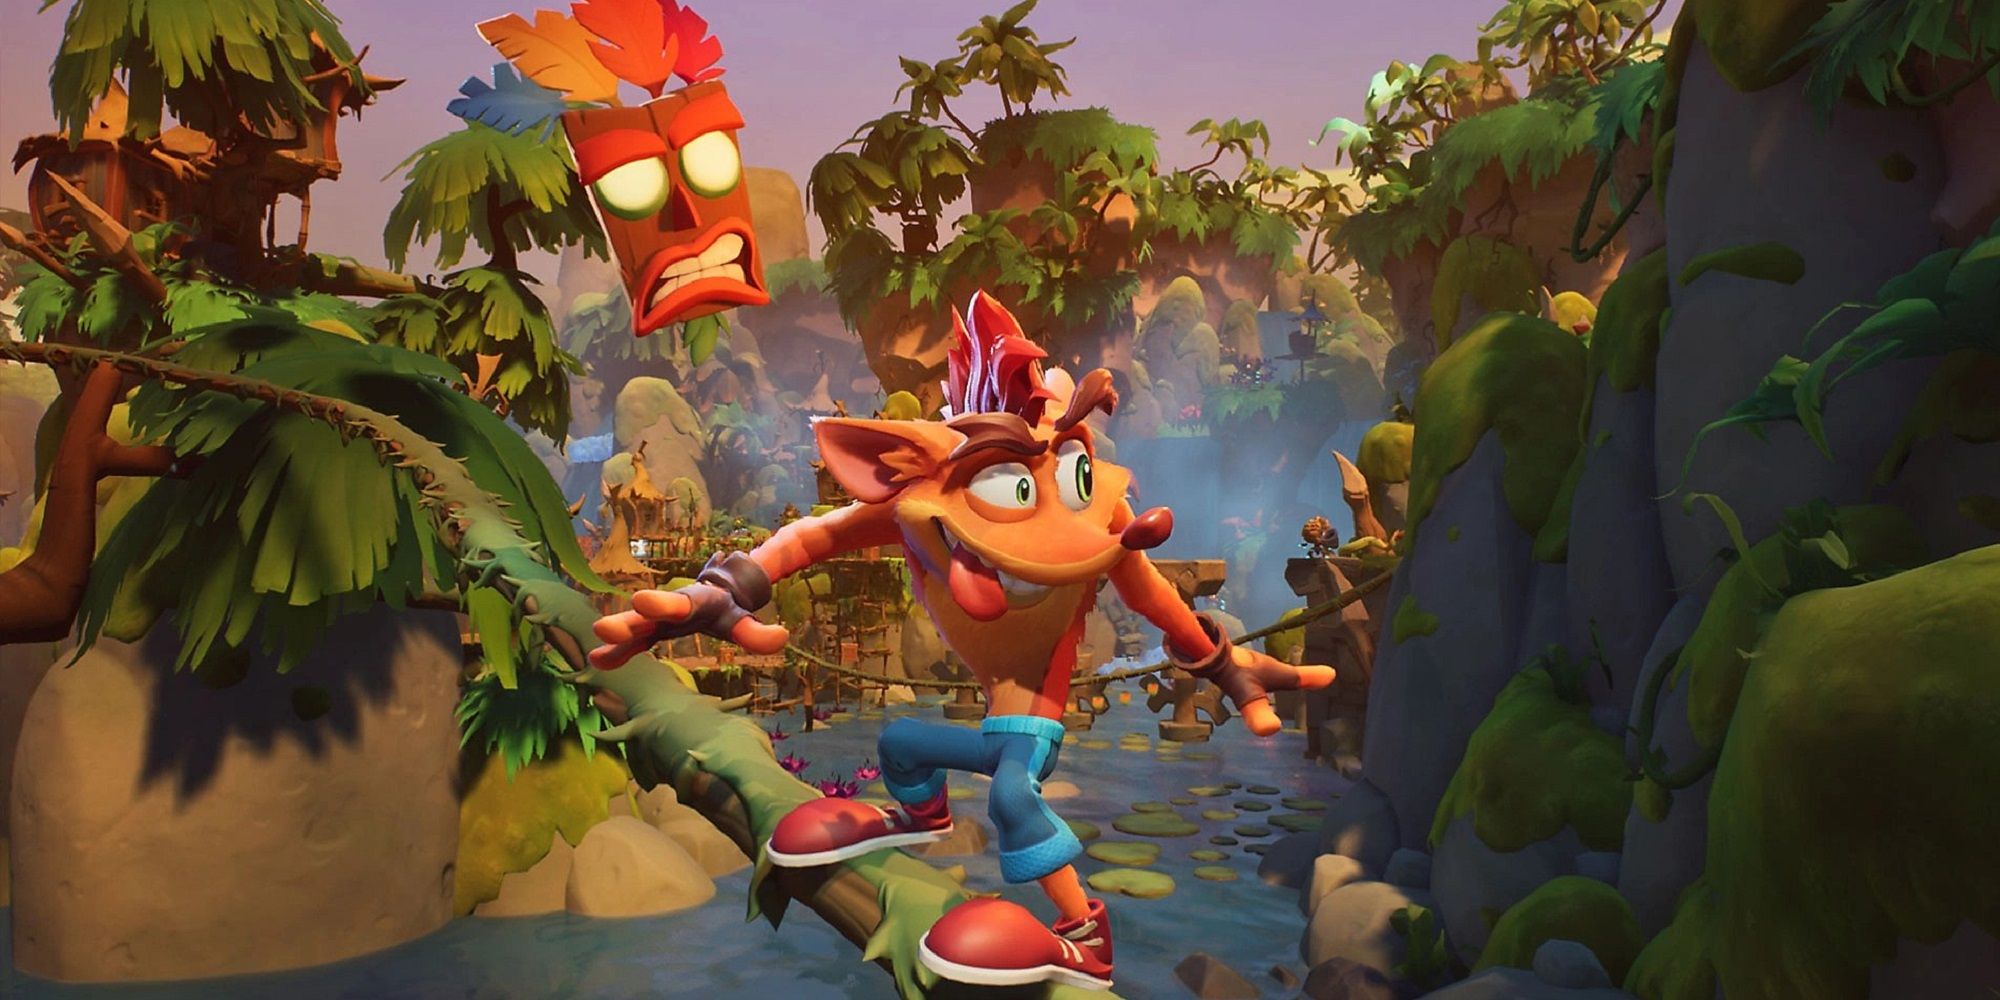 Crash Bandicoot Grinding On Vine With Mask Following Behind